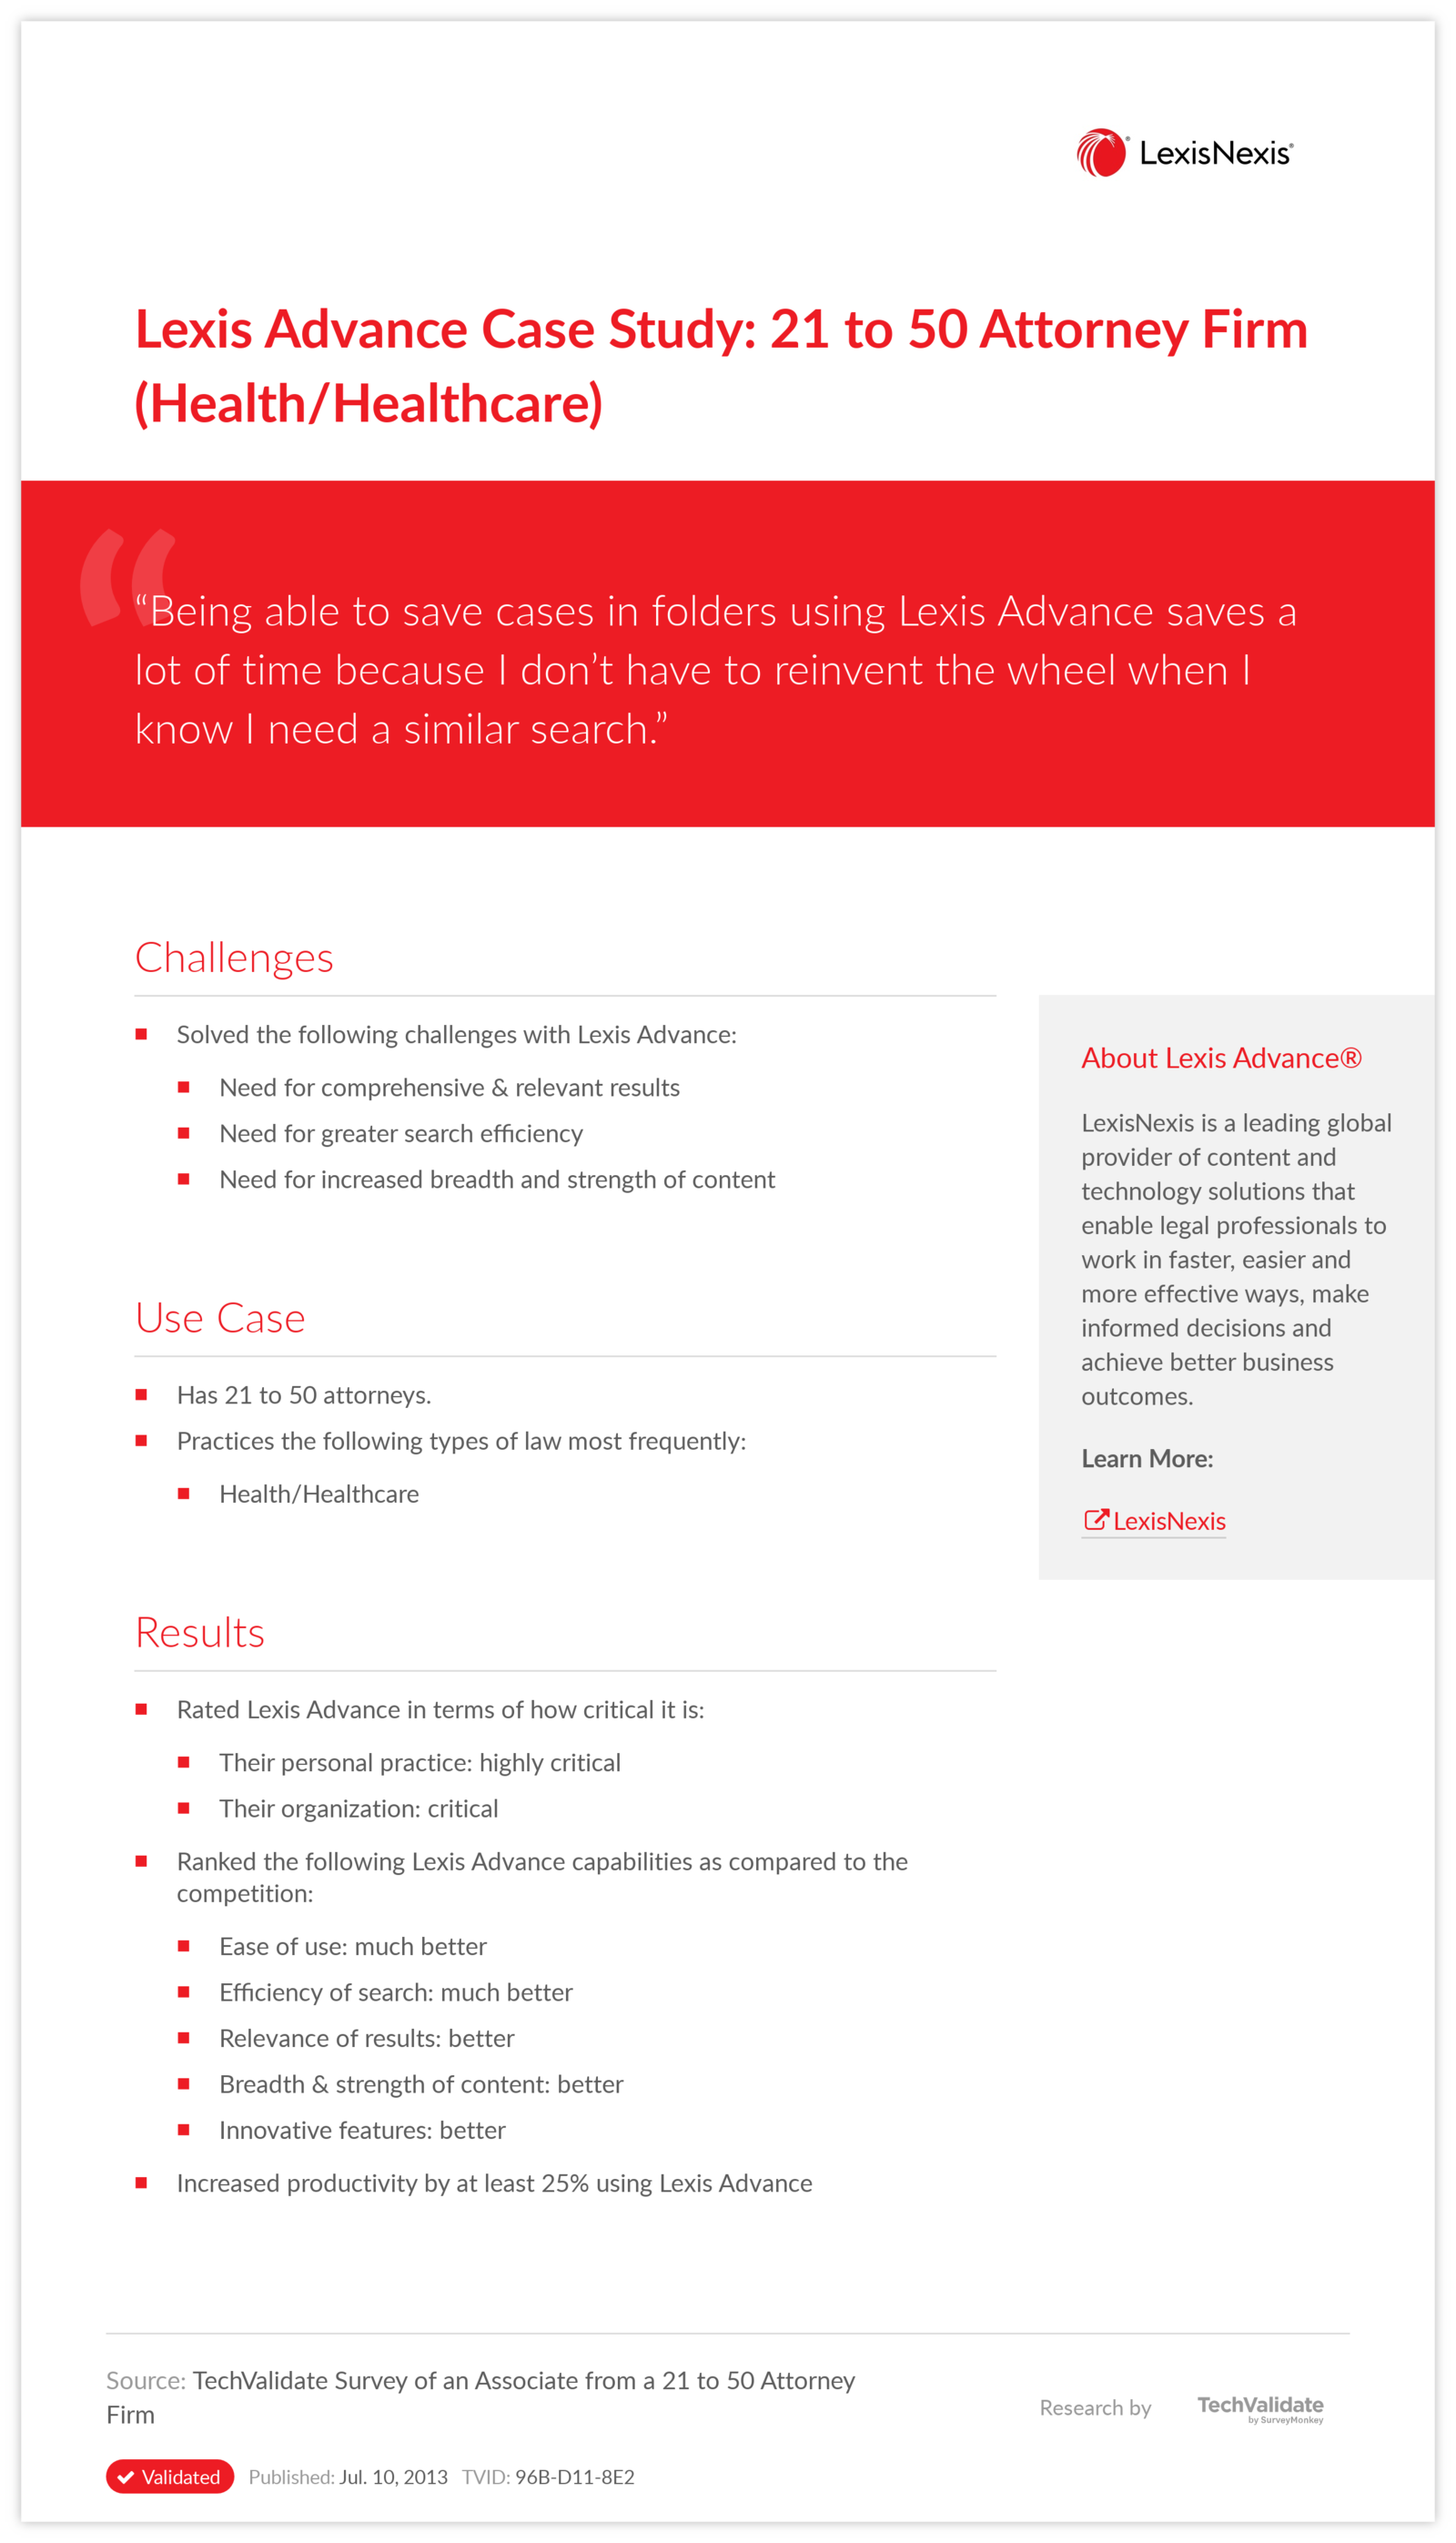 Lexis Advance Case Study: 21 to 50 Attorney Firm (Health/Healthcare)